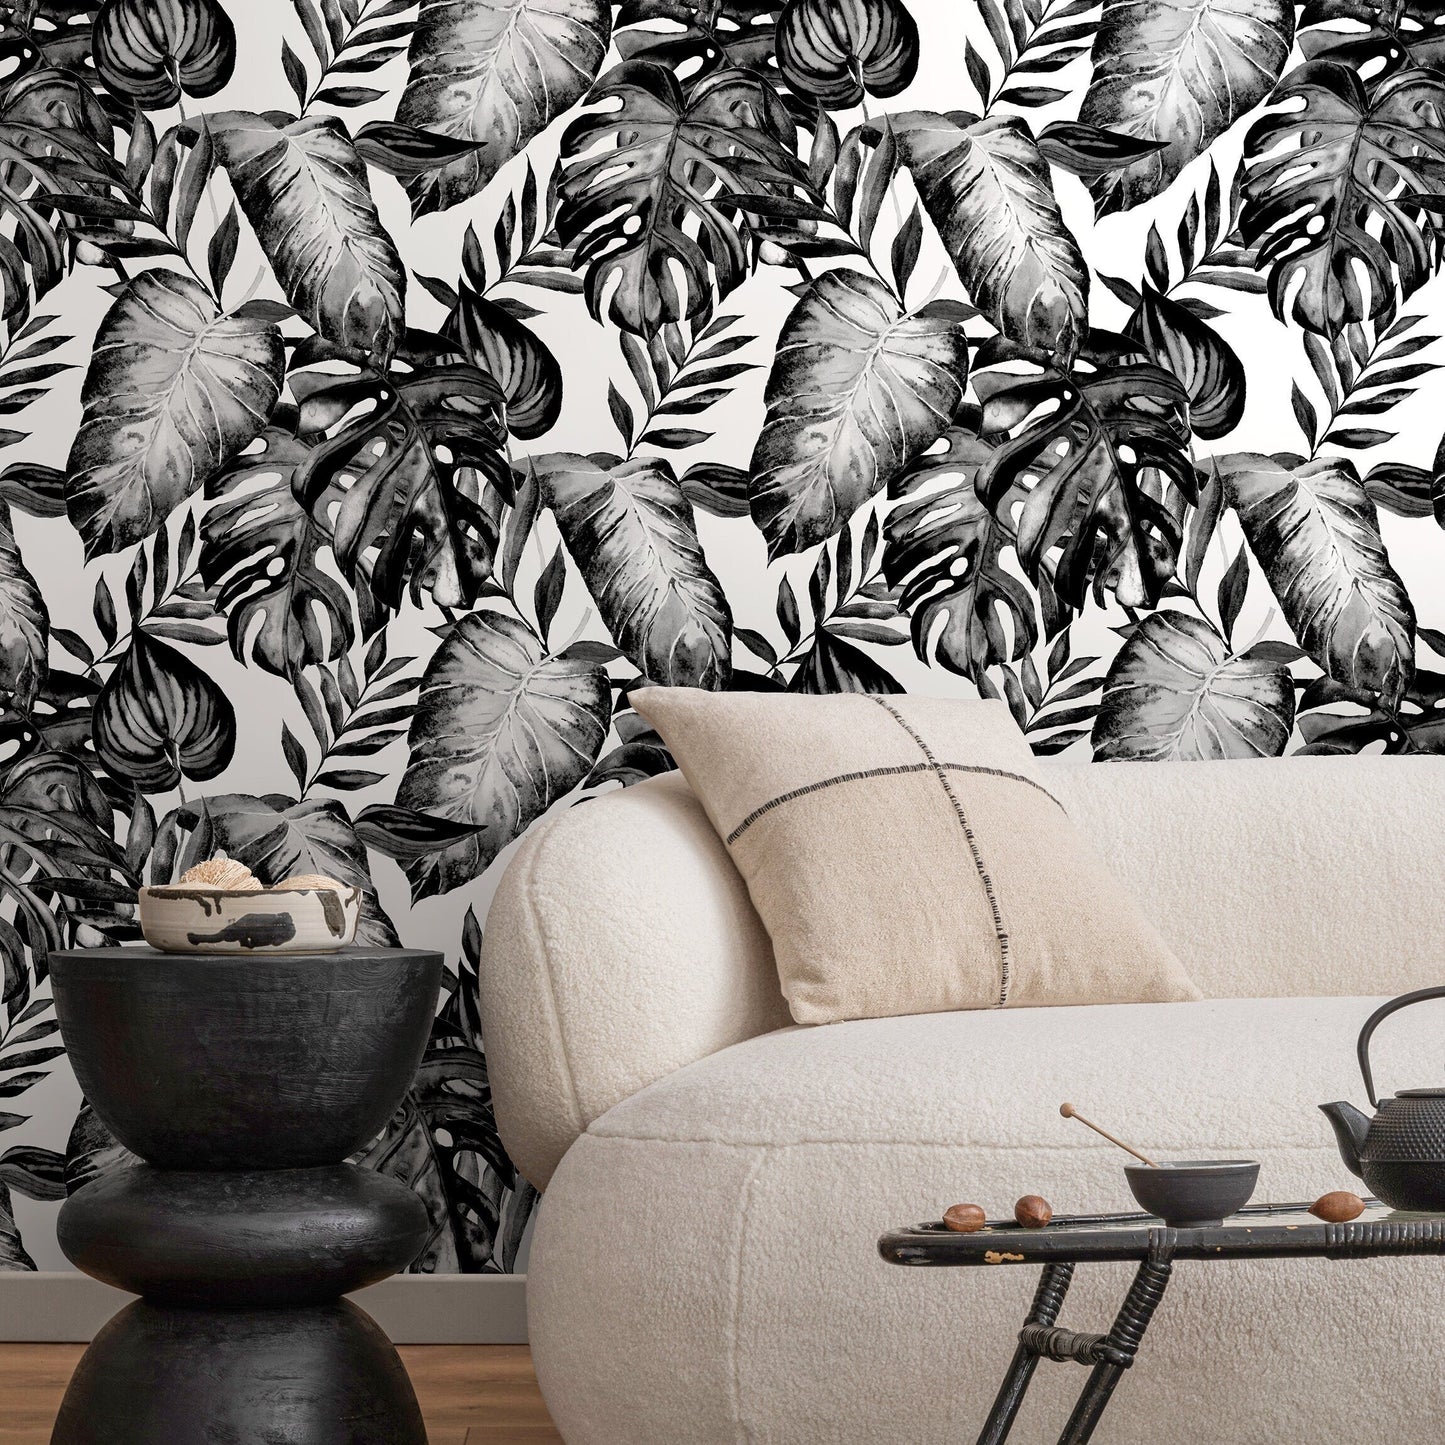 Wallpaper Peel and Stick Wallpaper Removable Wallpaper Home Decor Wall Art Wall Decor Room Decor / Black and White Monstera Wallpaper -B655